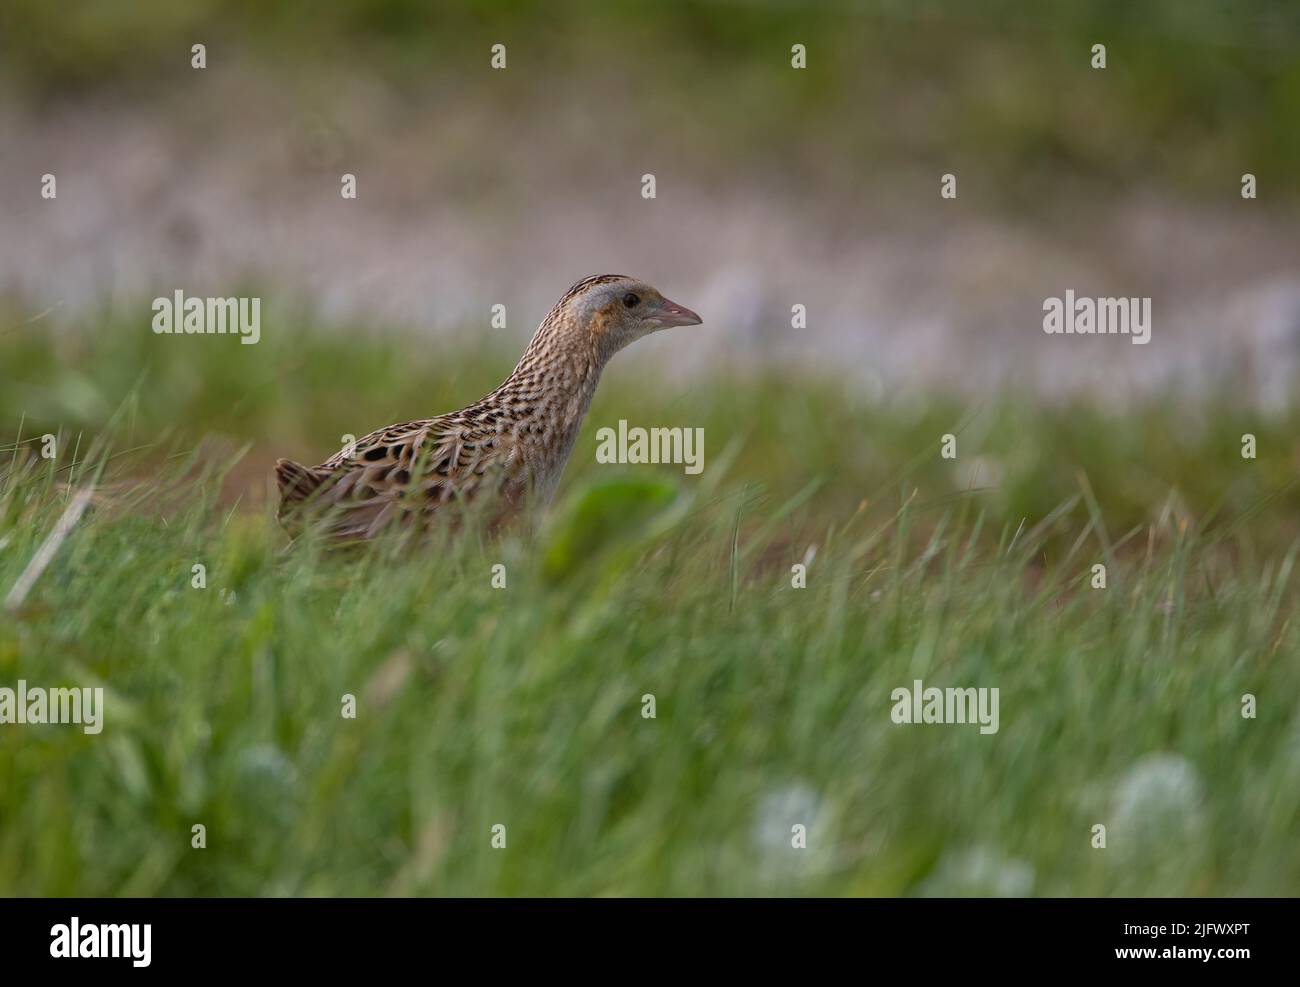 A solitary and rare Corncrake (Crex crex) Corn crake or land rail in profile in long grass on the Isle of North Uist, Outer Hebrides, Scotland Stock Photo